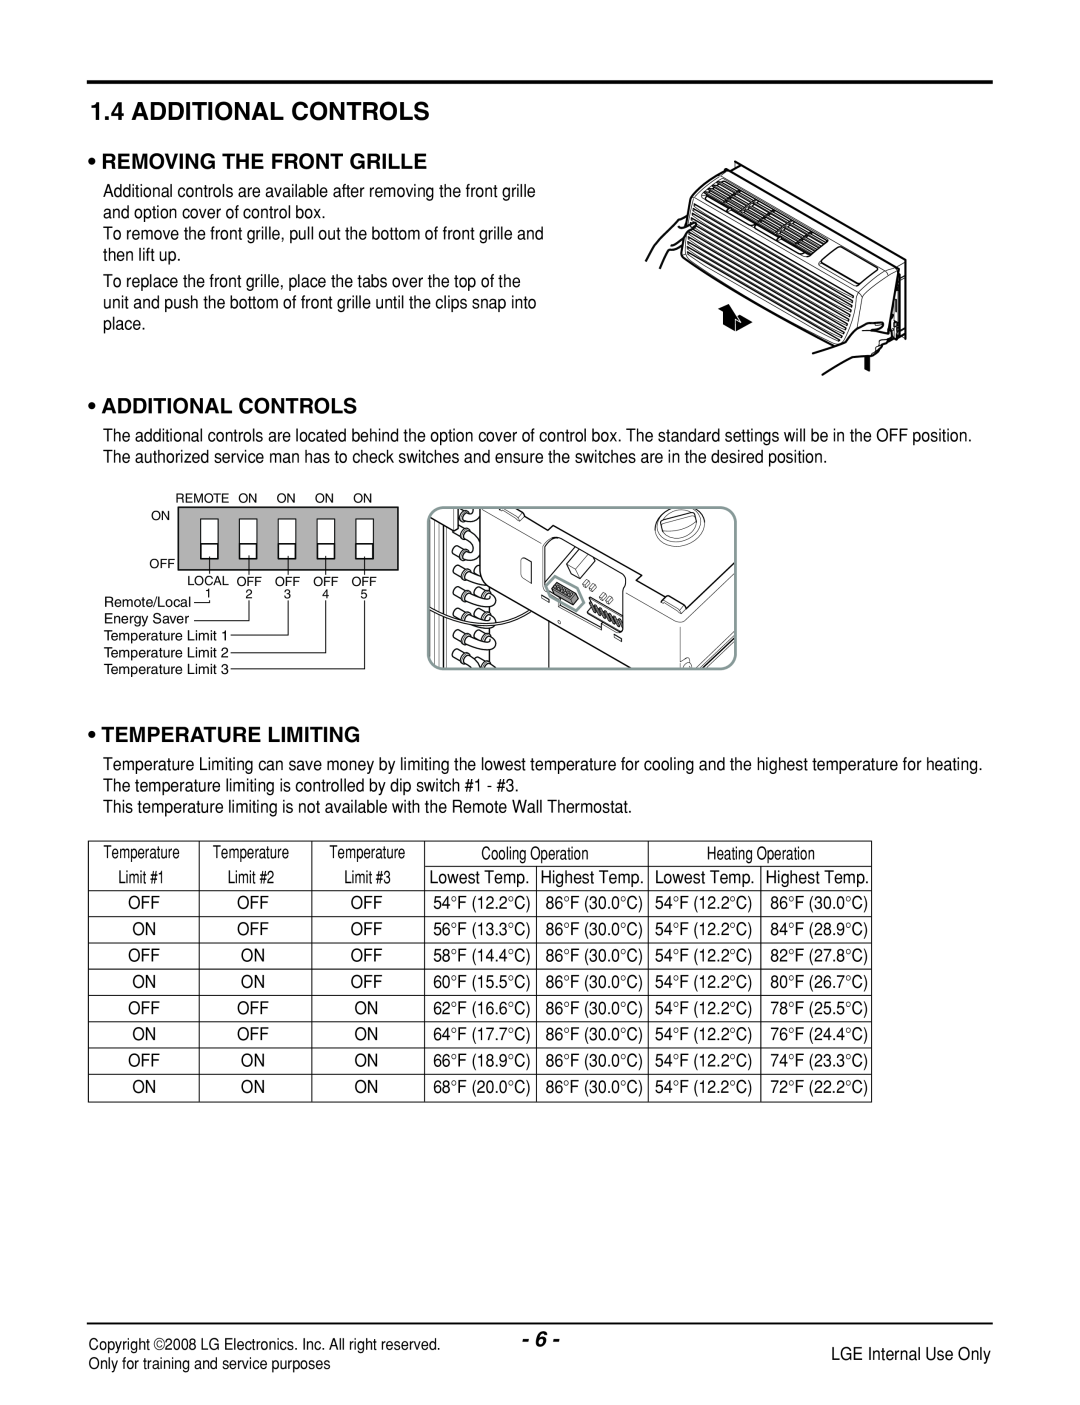 LG Electronics LP121CEM-Y8 manual Additional Controls, Removing The Front Grille, Temperature Limiting 